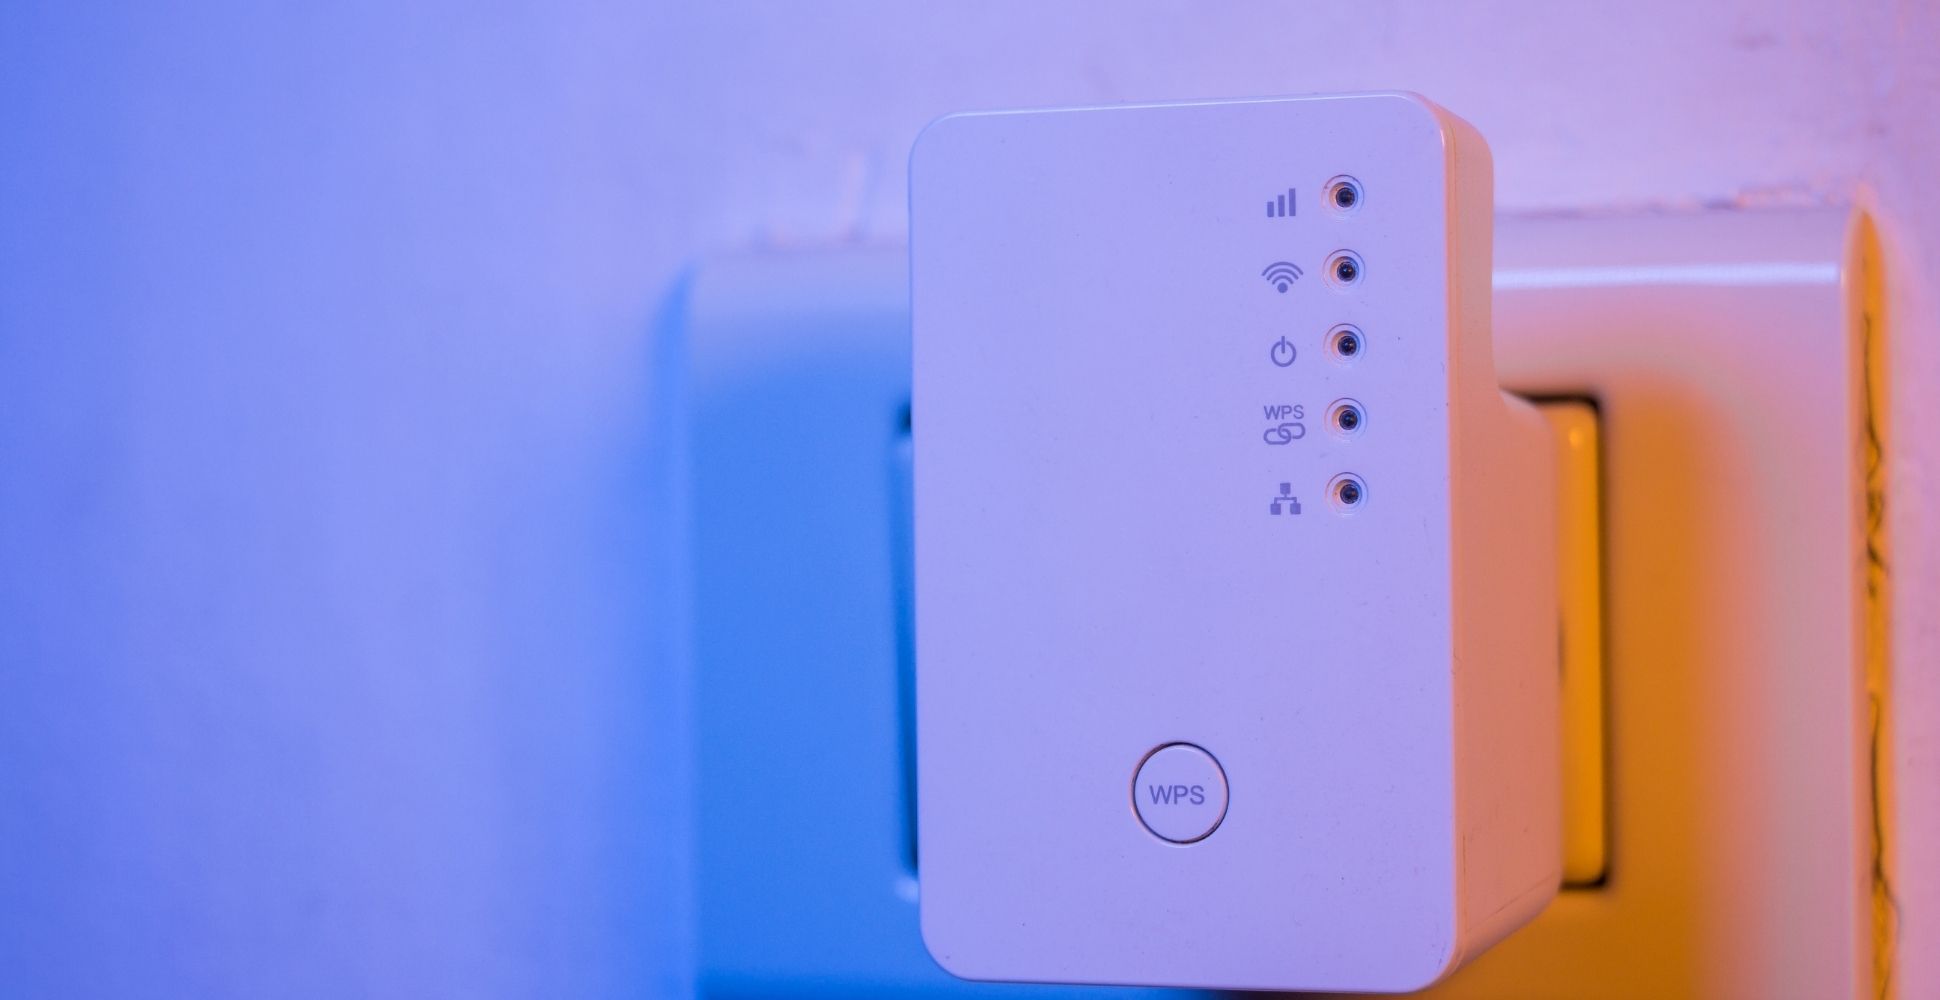 5 Best Wifi Extender Boosters UK (Dec 2020 Review)